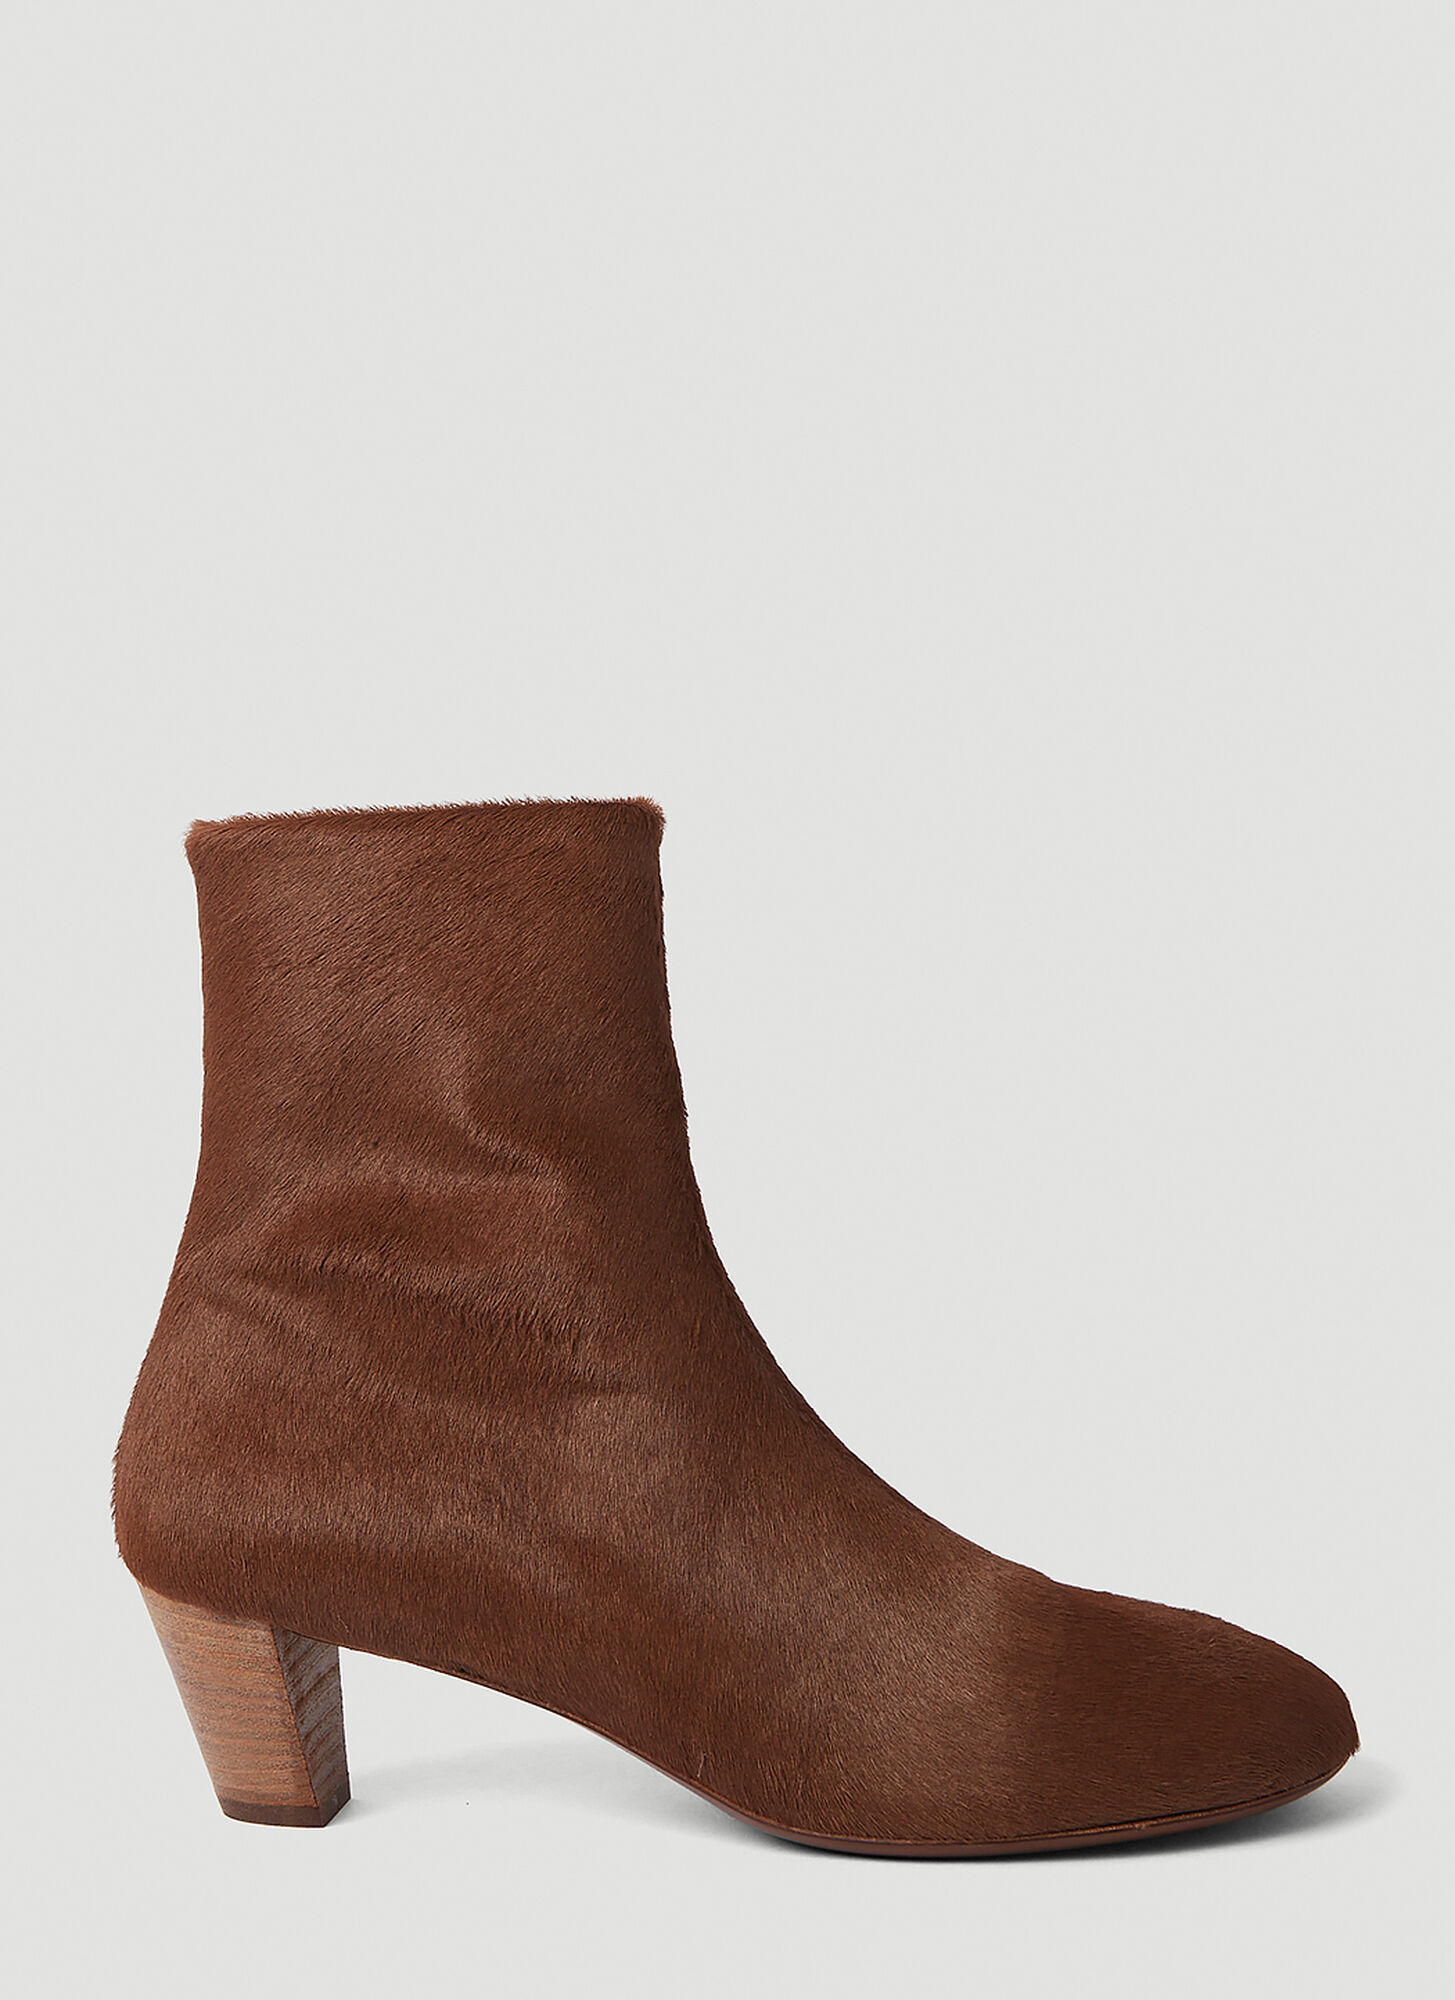 Marsèll Biscotto Heeled Boots In Brown